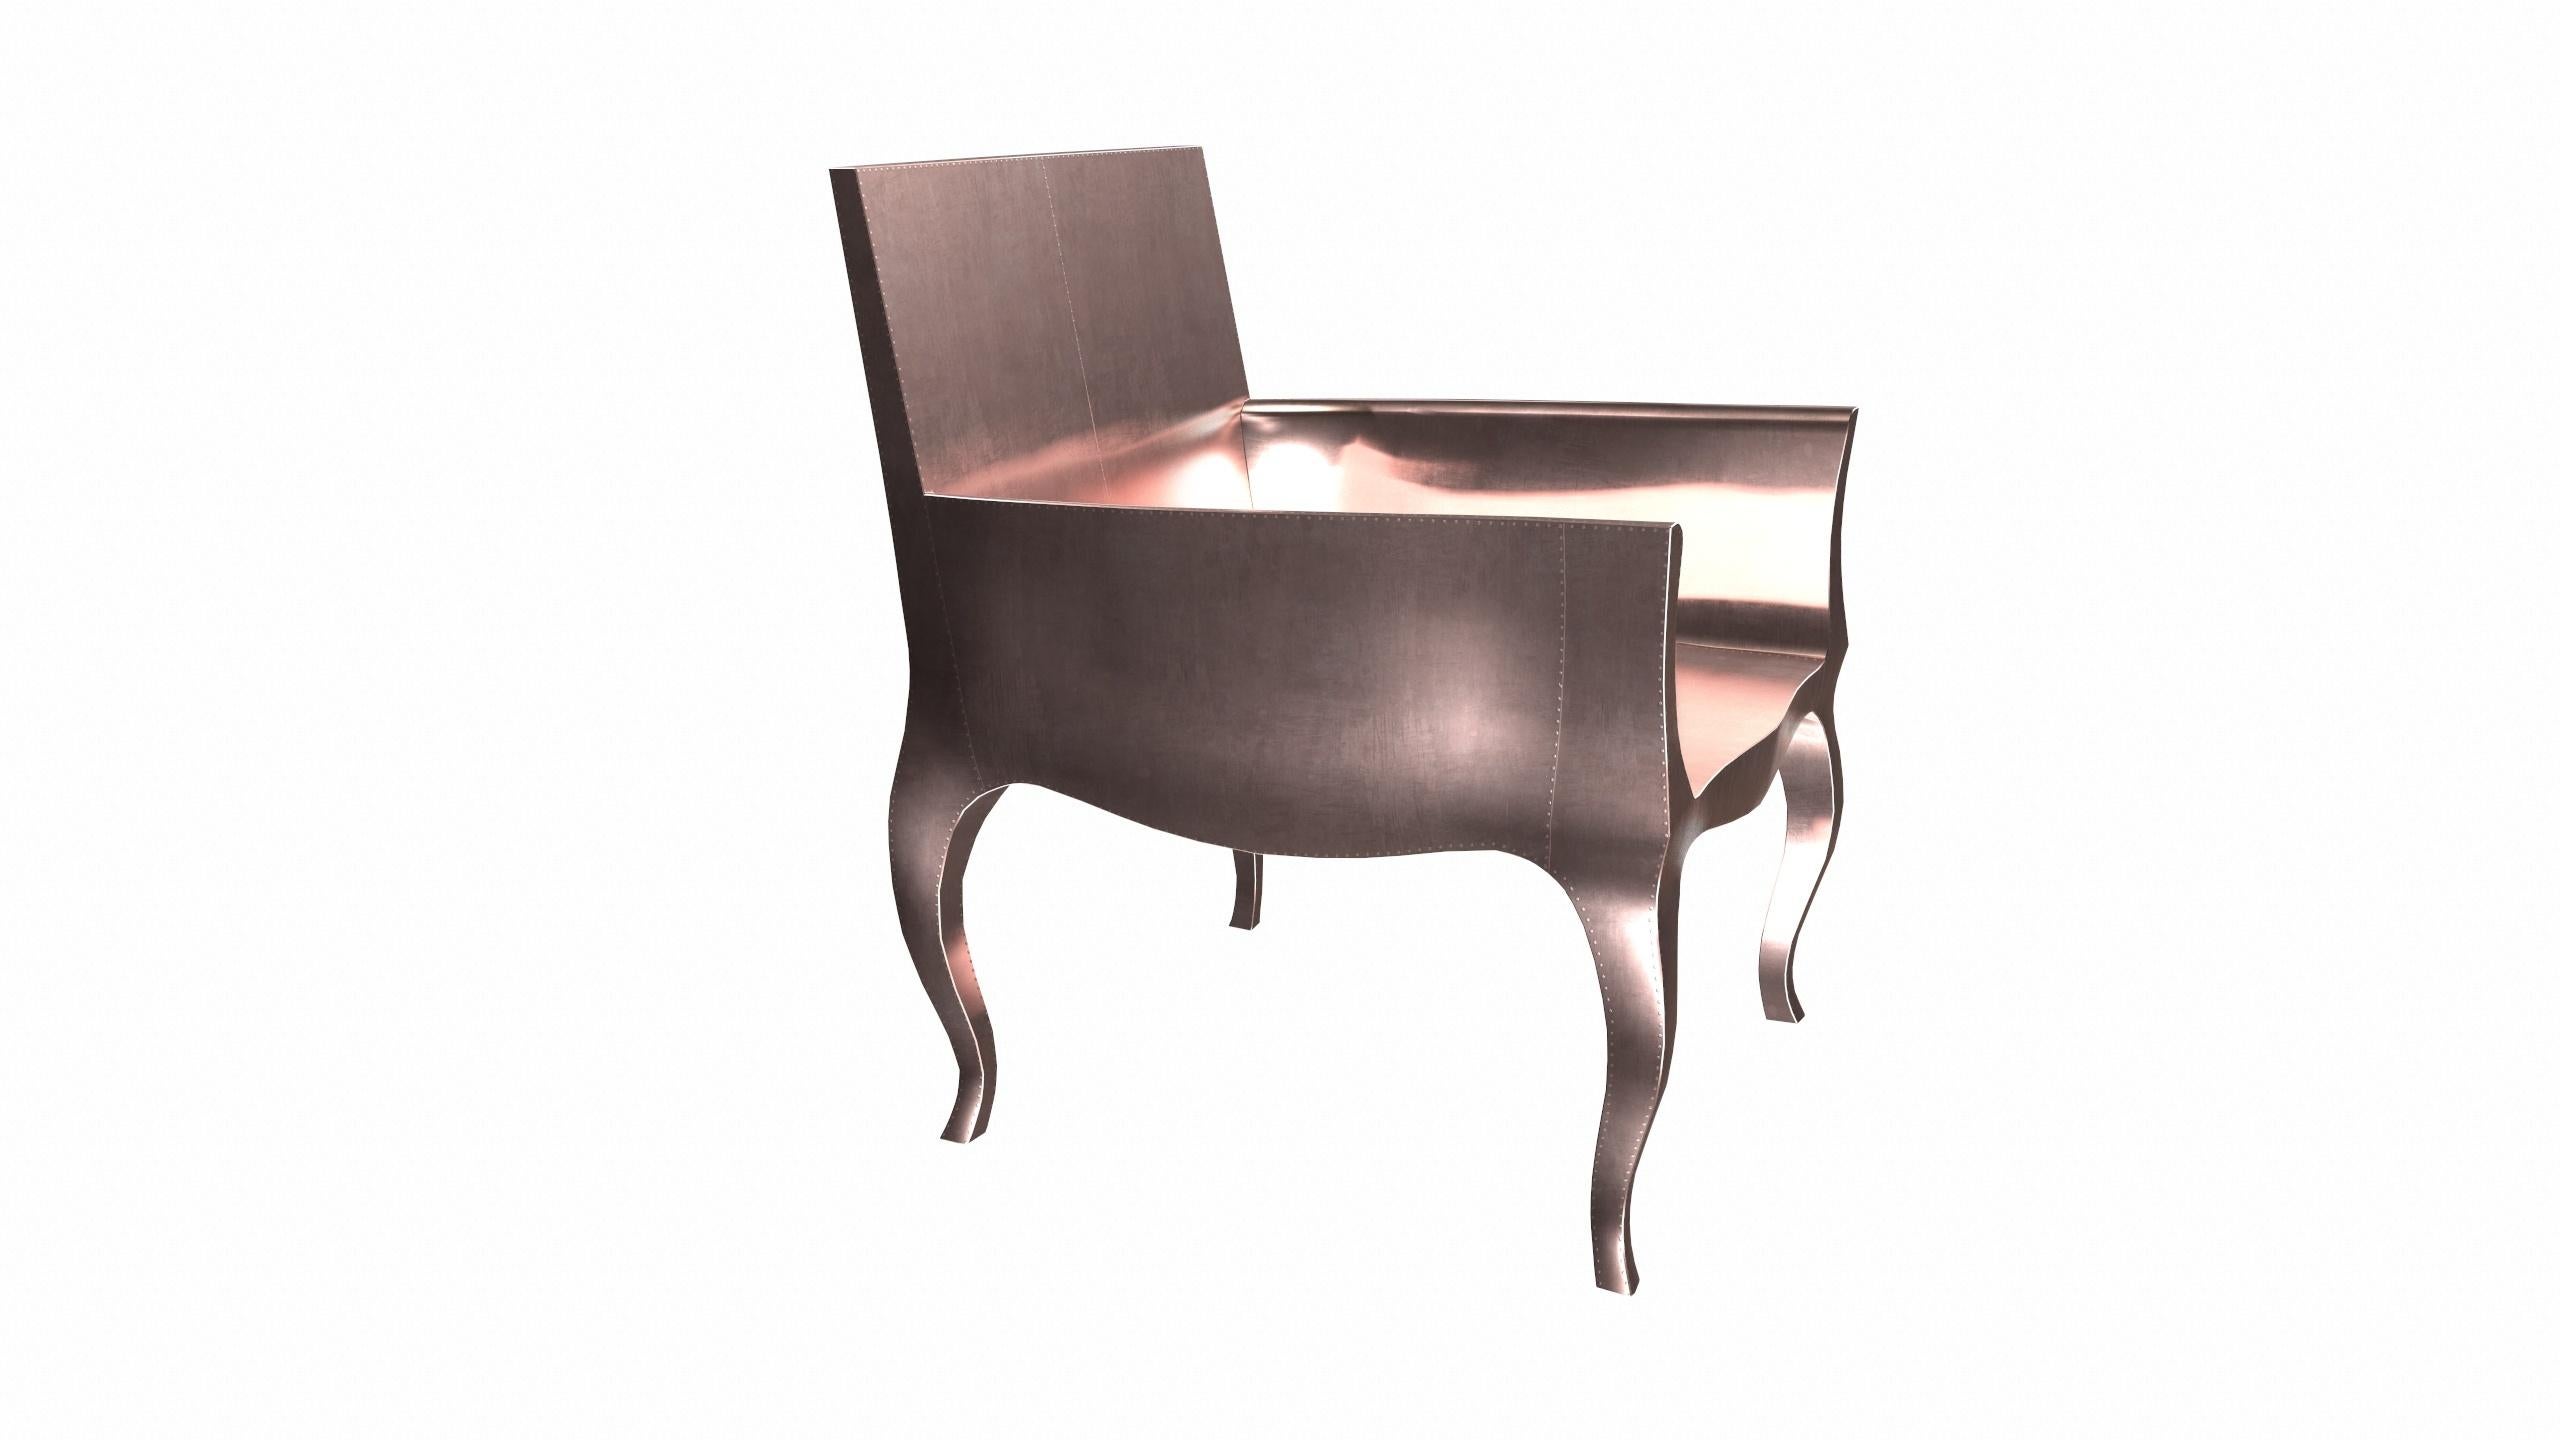 Hand-Carved Art Deco Chairs in Smooth Copper by Paul Mathieu for S. Odegard For Sale